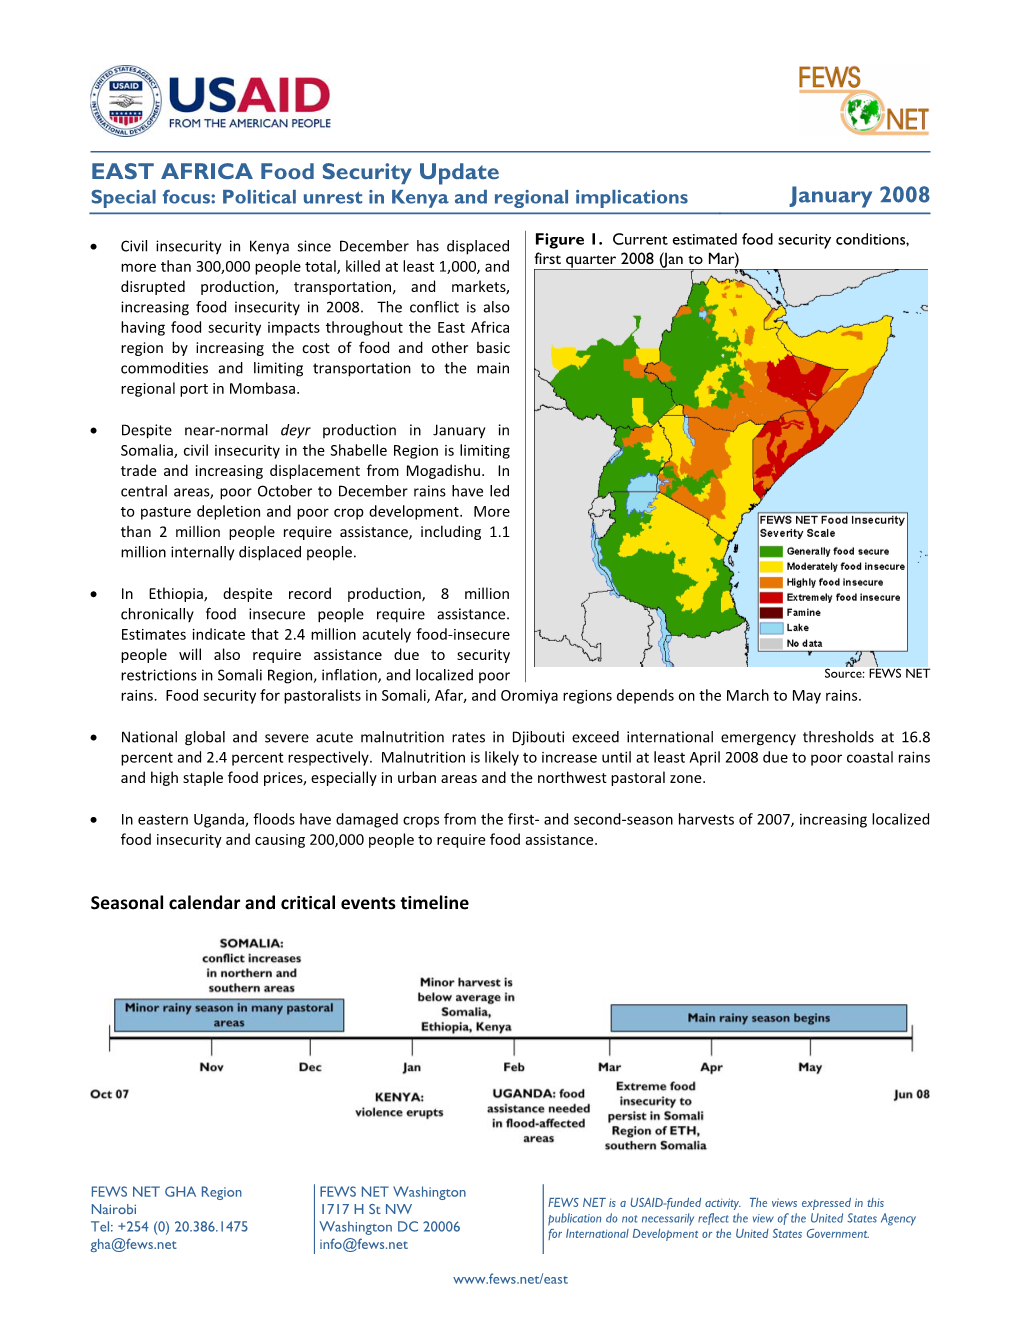 EAST AFRICA Food Security Update January 2008